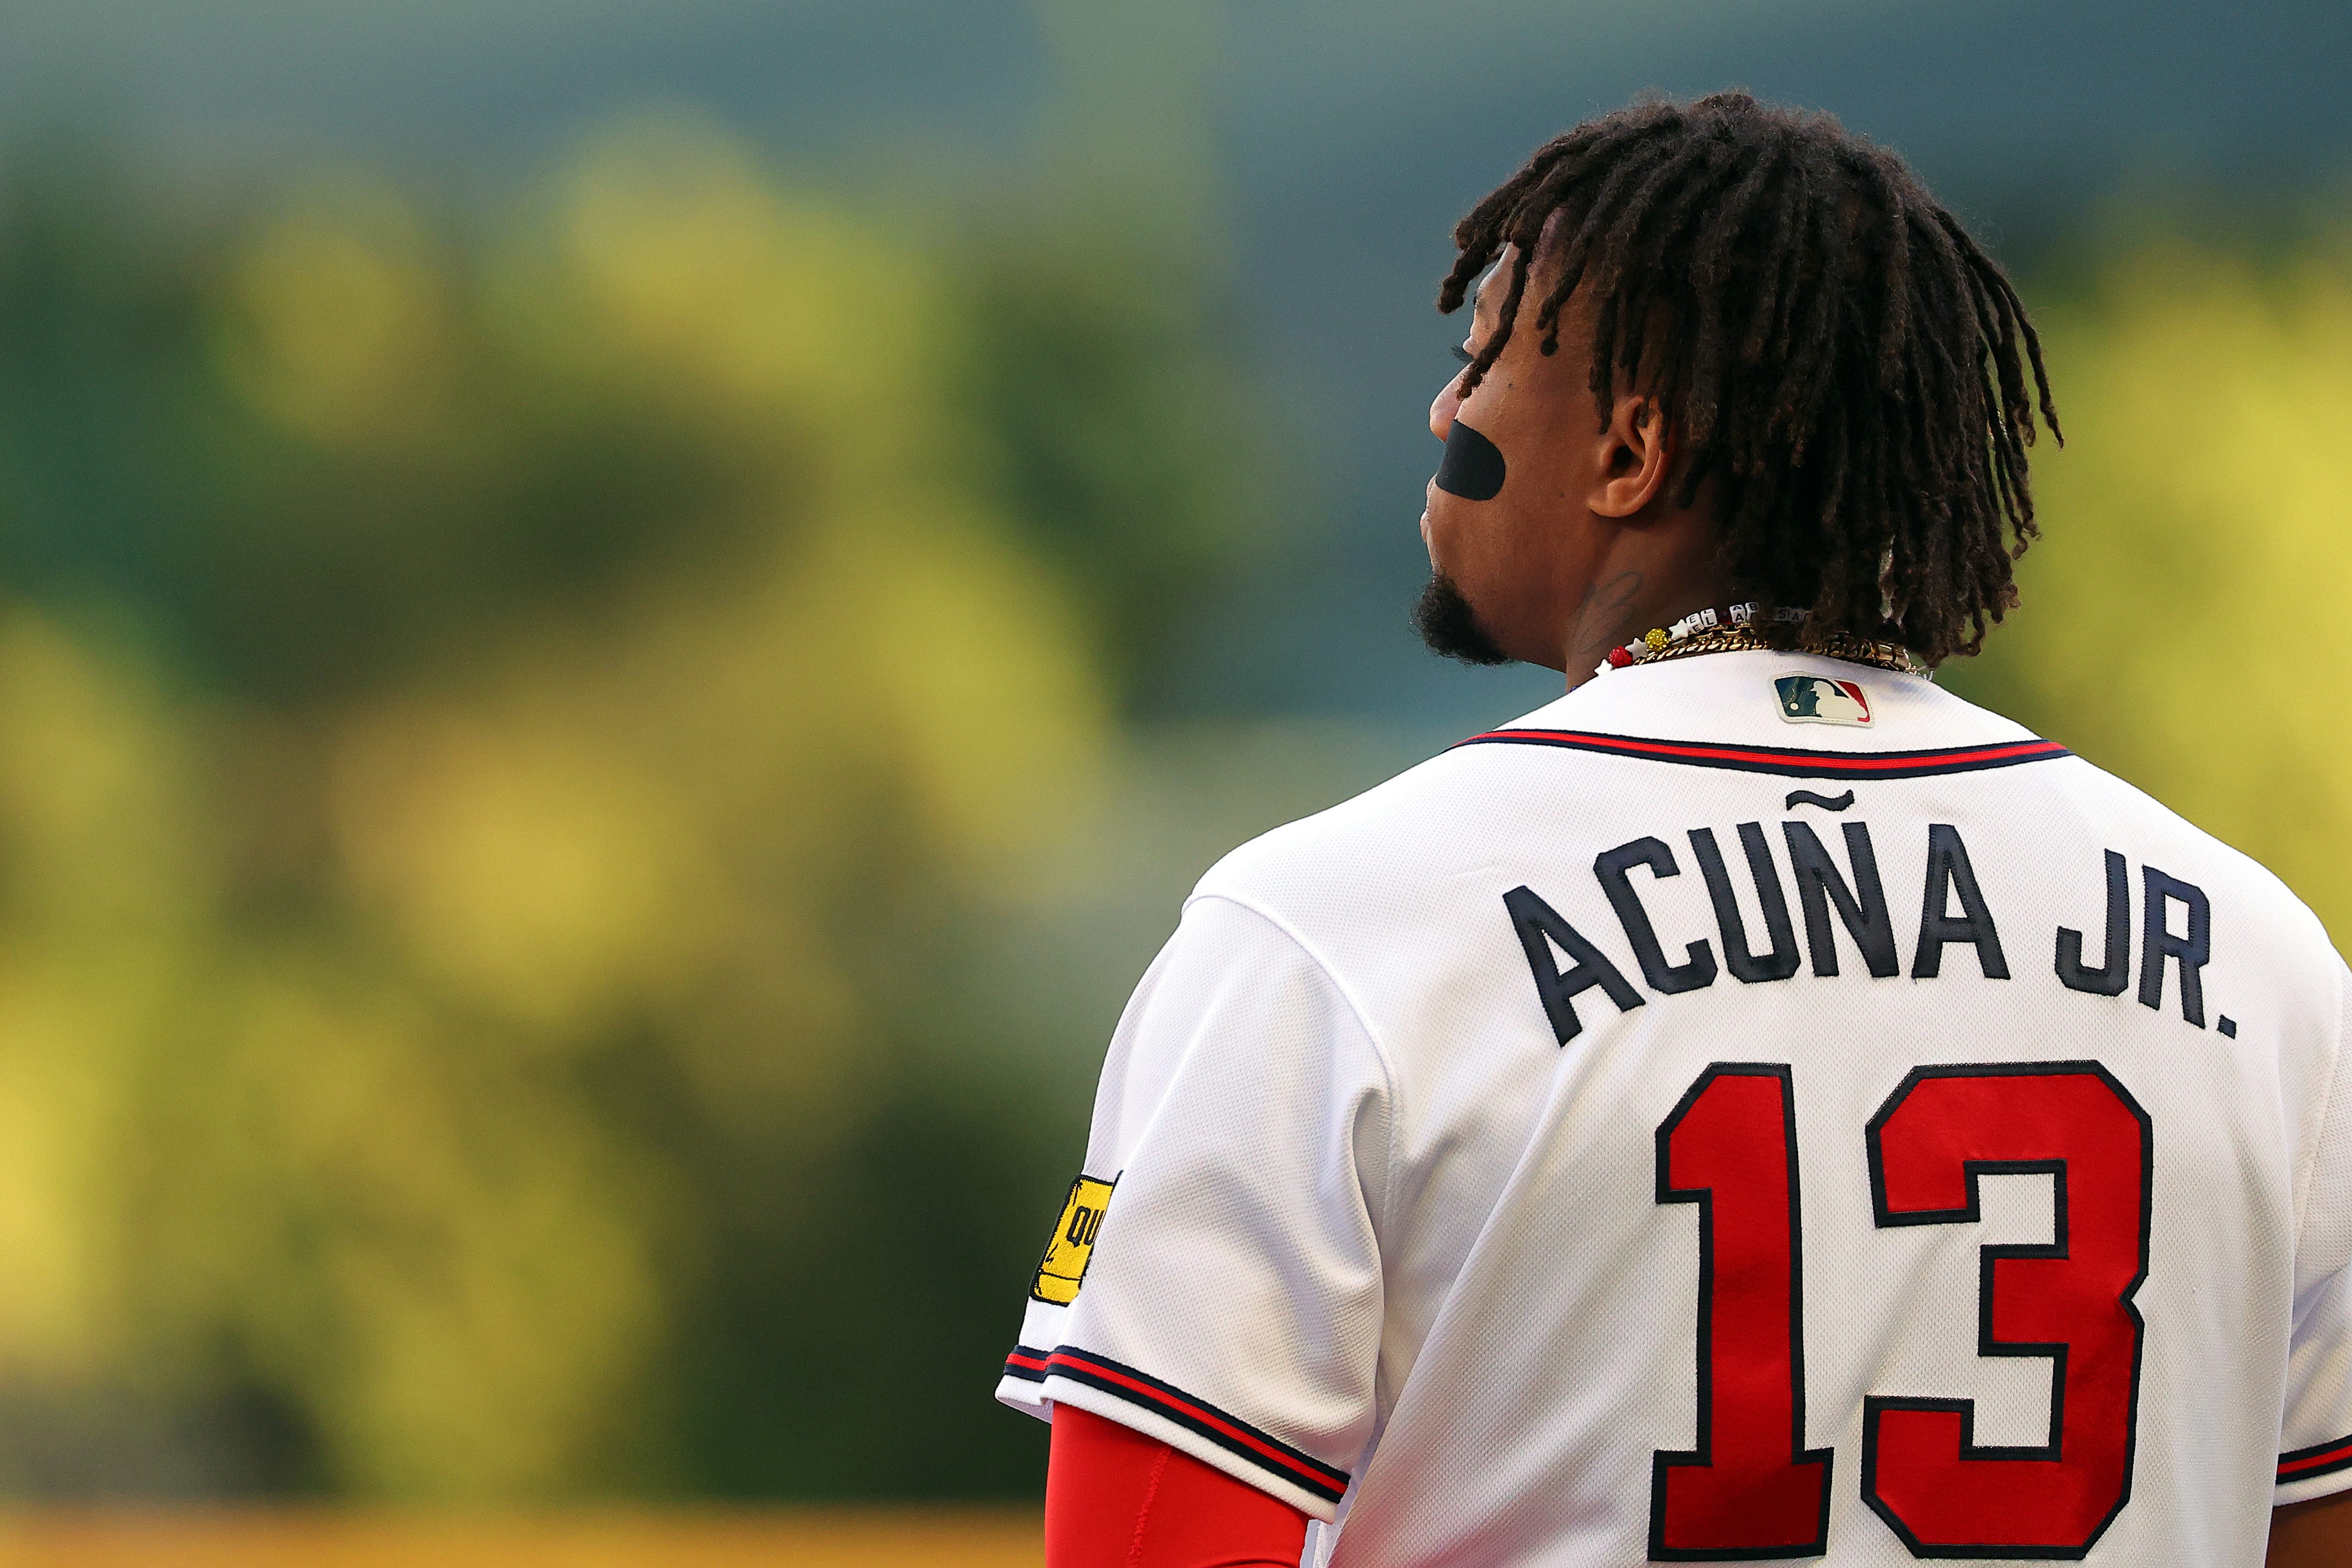 Cardinals: 3 bold predictions after the 2022 MLB All-Star break